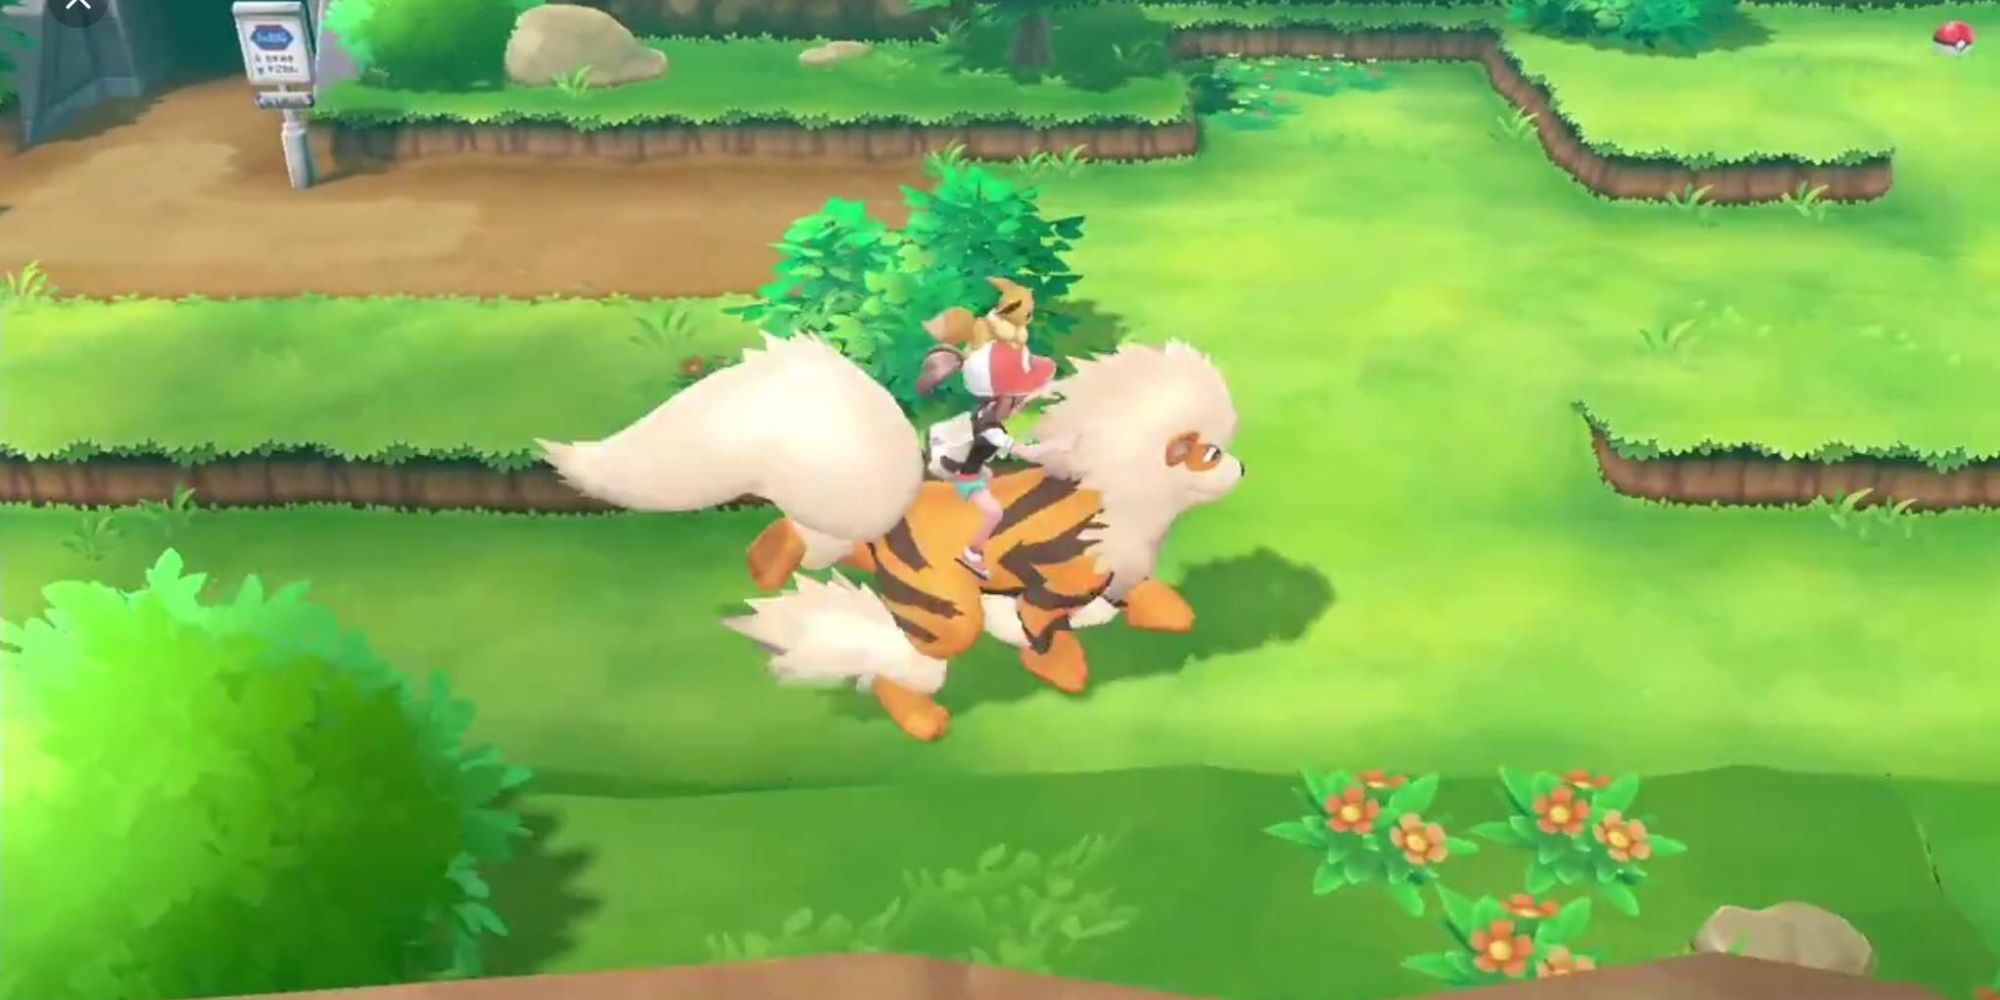 A Pokemon Trainer rides an Arcanine through a route